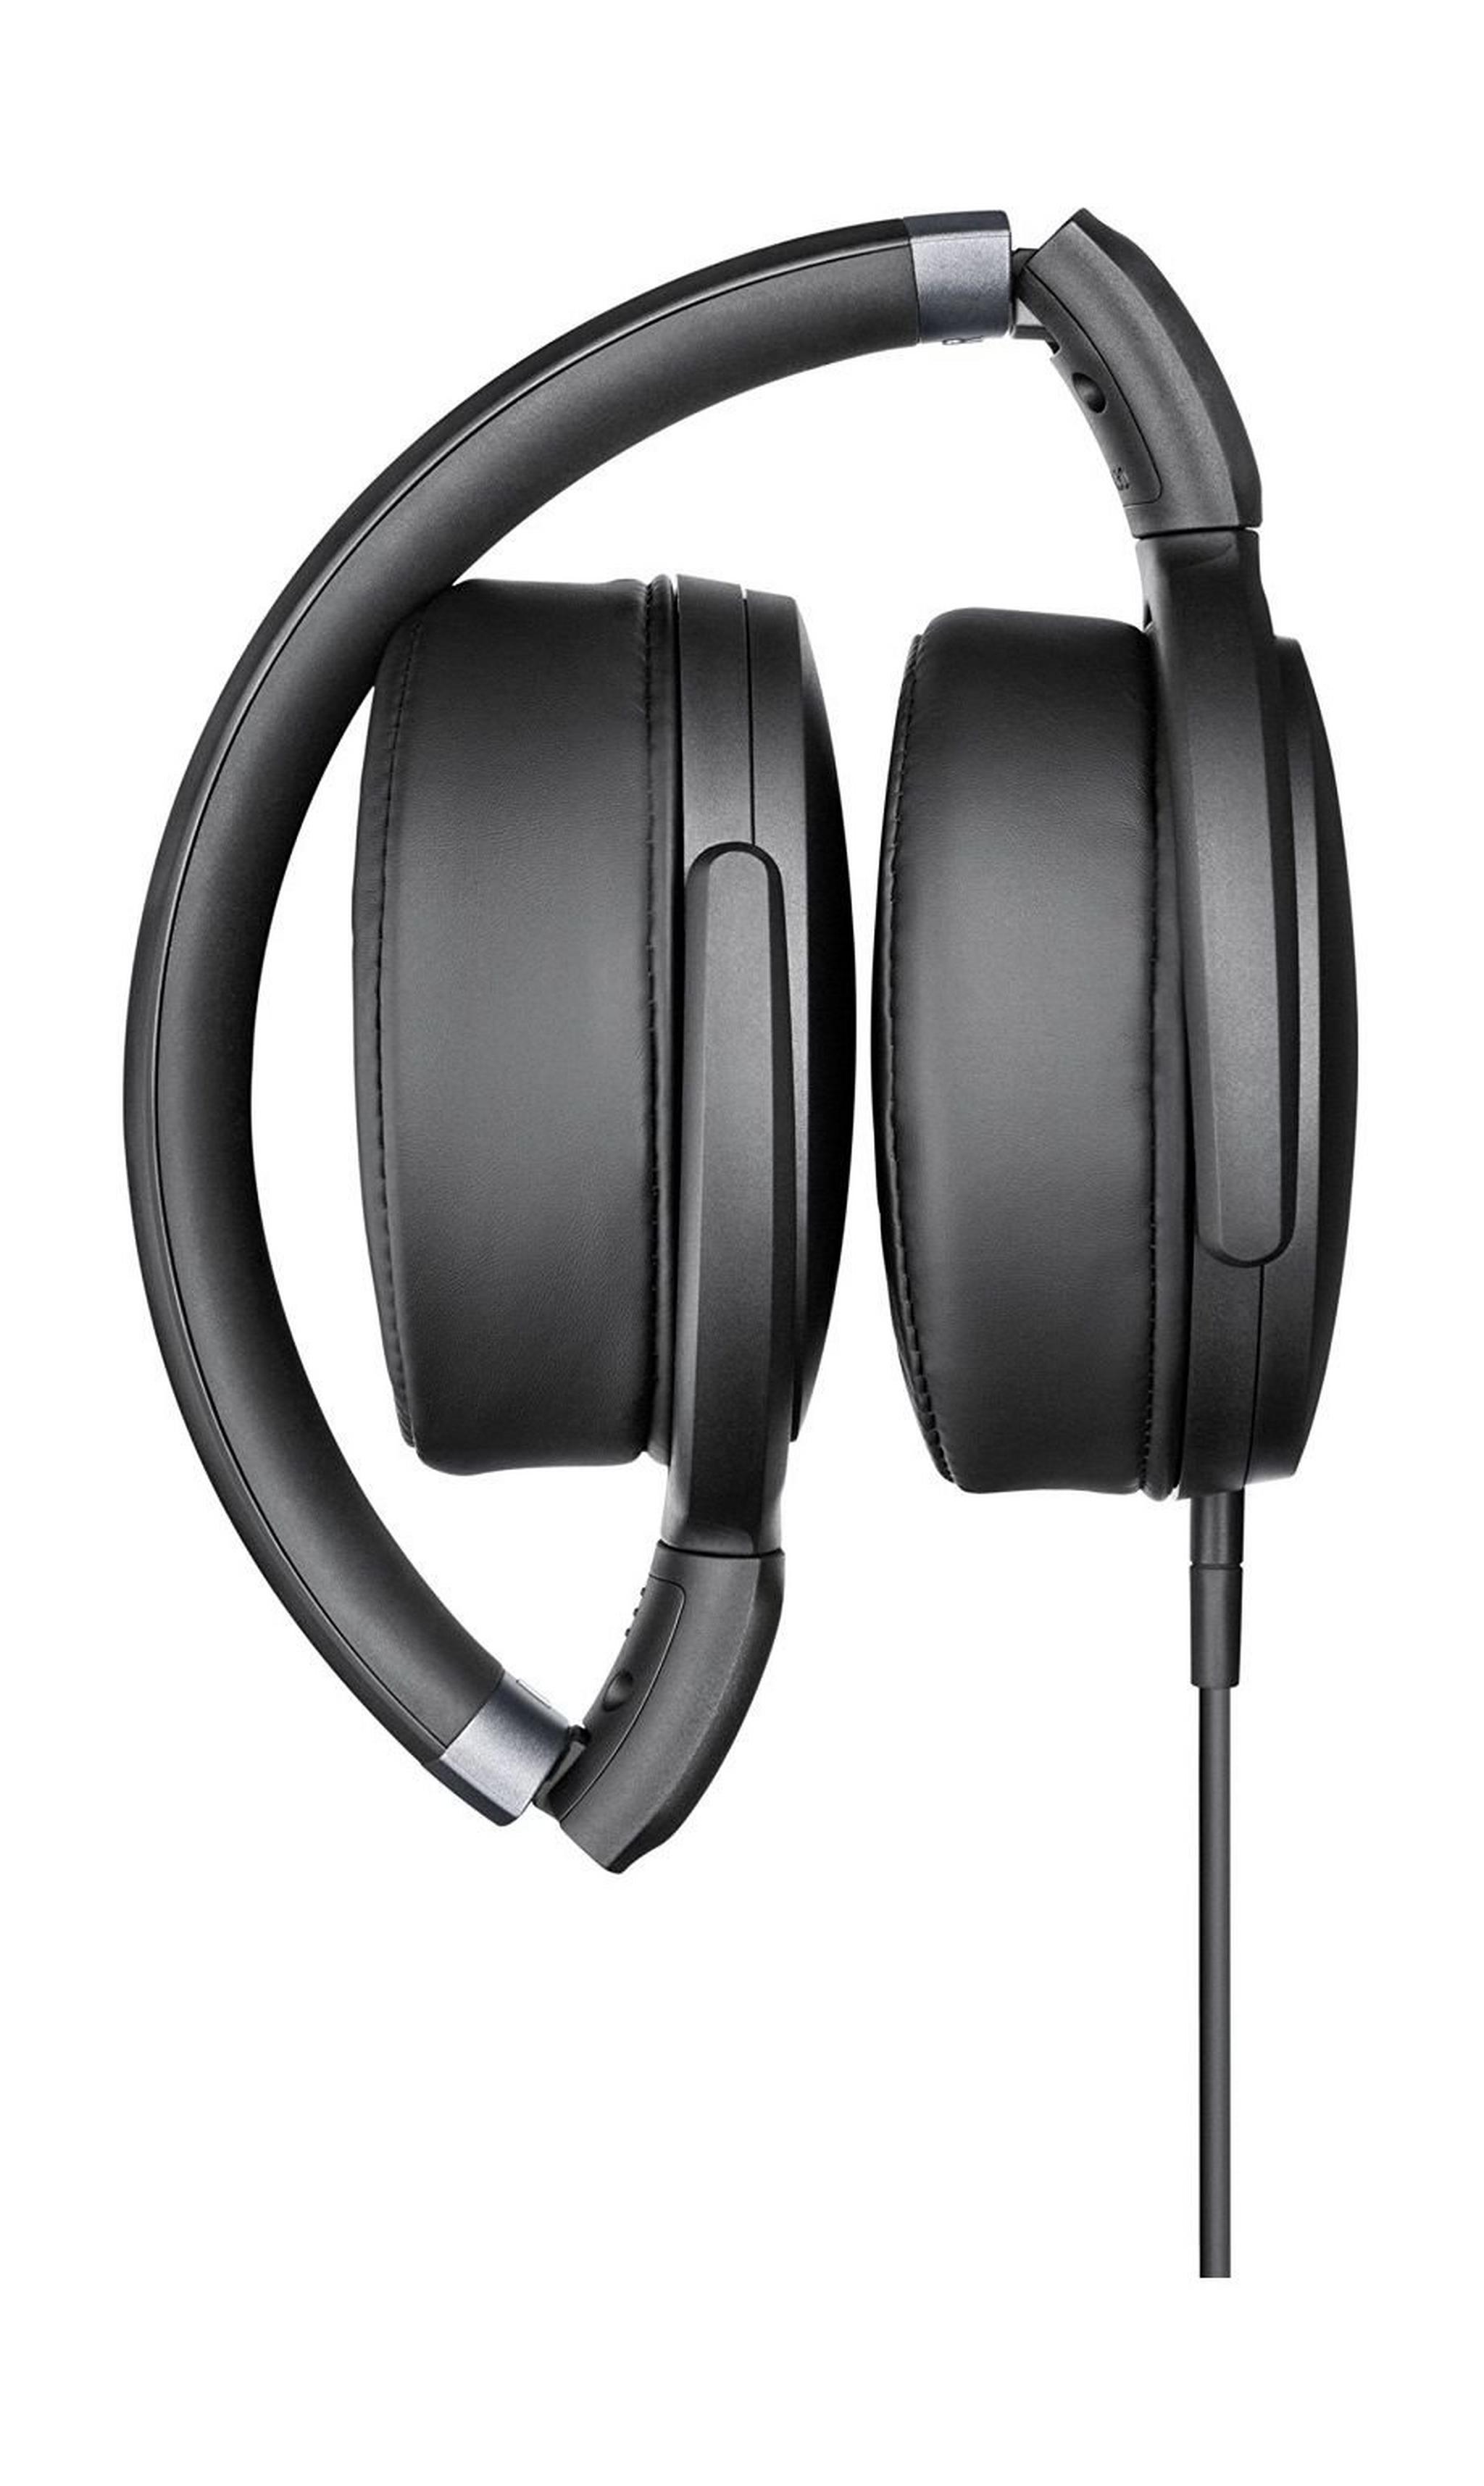 Sennheiser HD 4.30G Over-ear Stereo Wired Headphones with Microphone for Android - Black